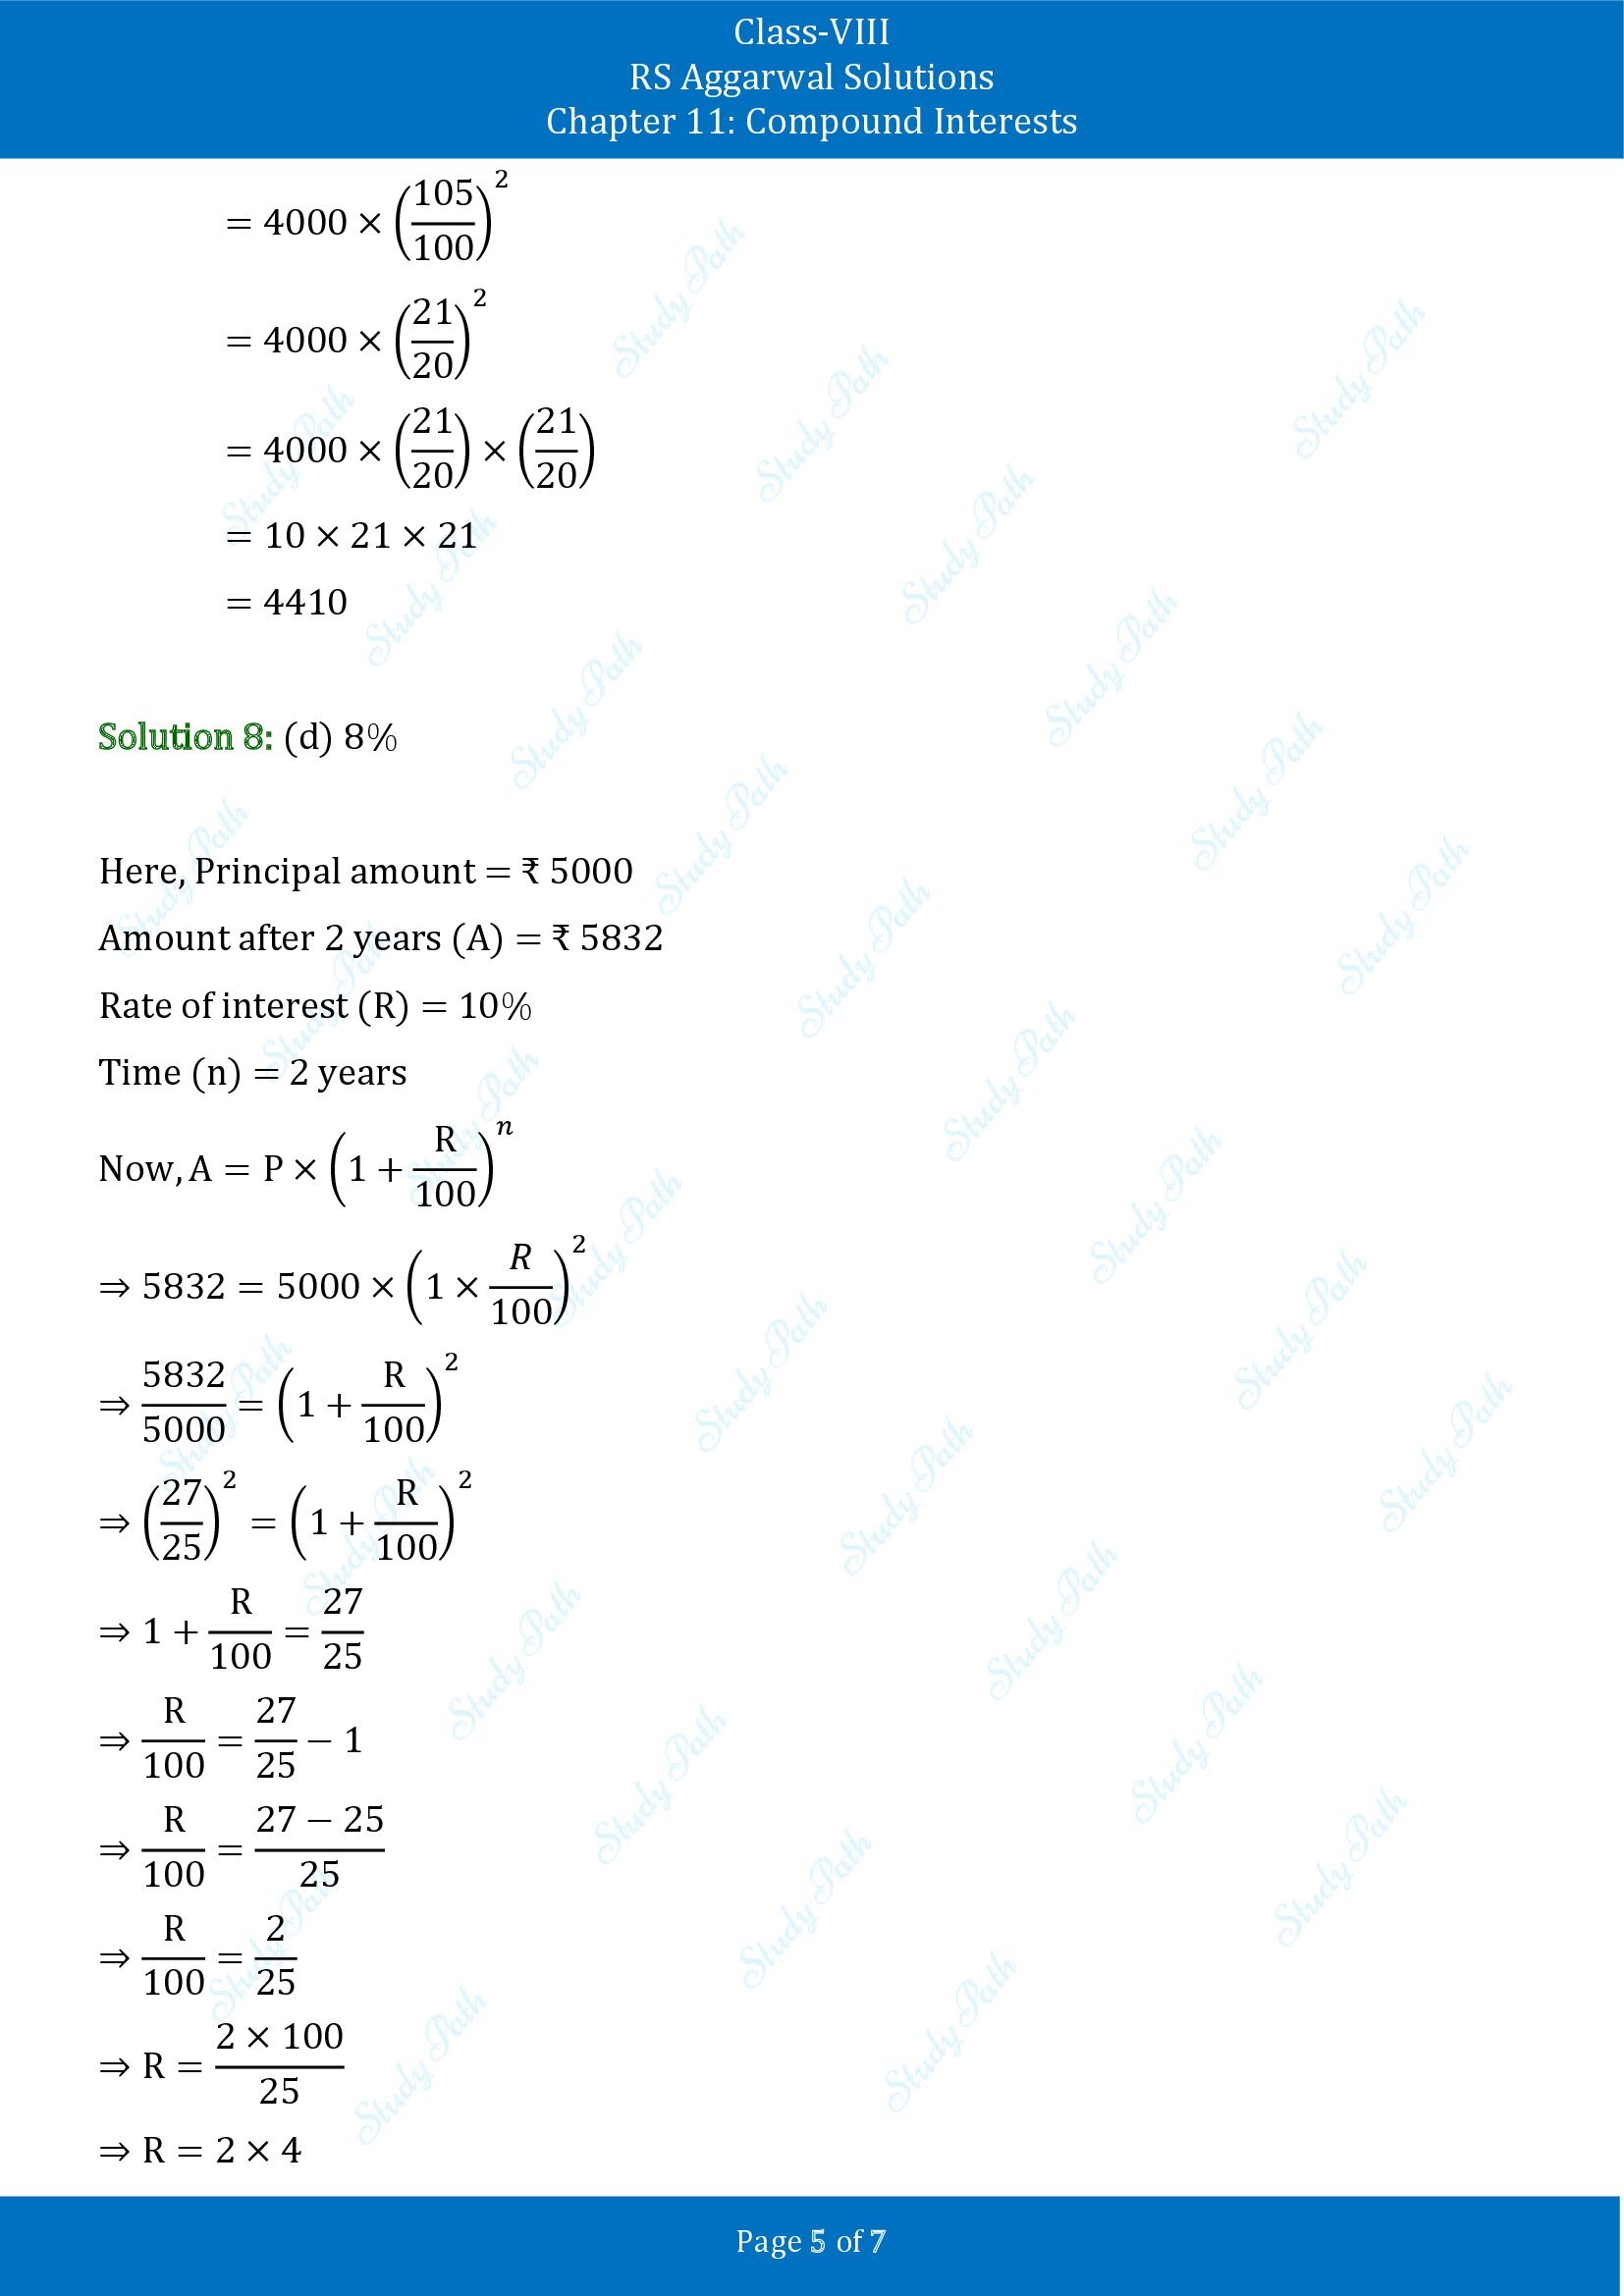 RS Aggarwal Solutions Class 8 Chapter 11 Compound Interests Test Paper 00005